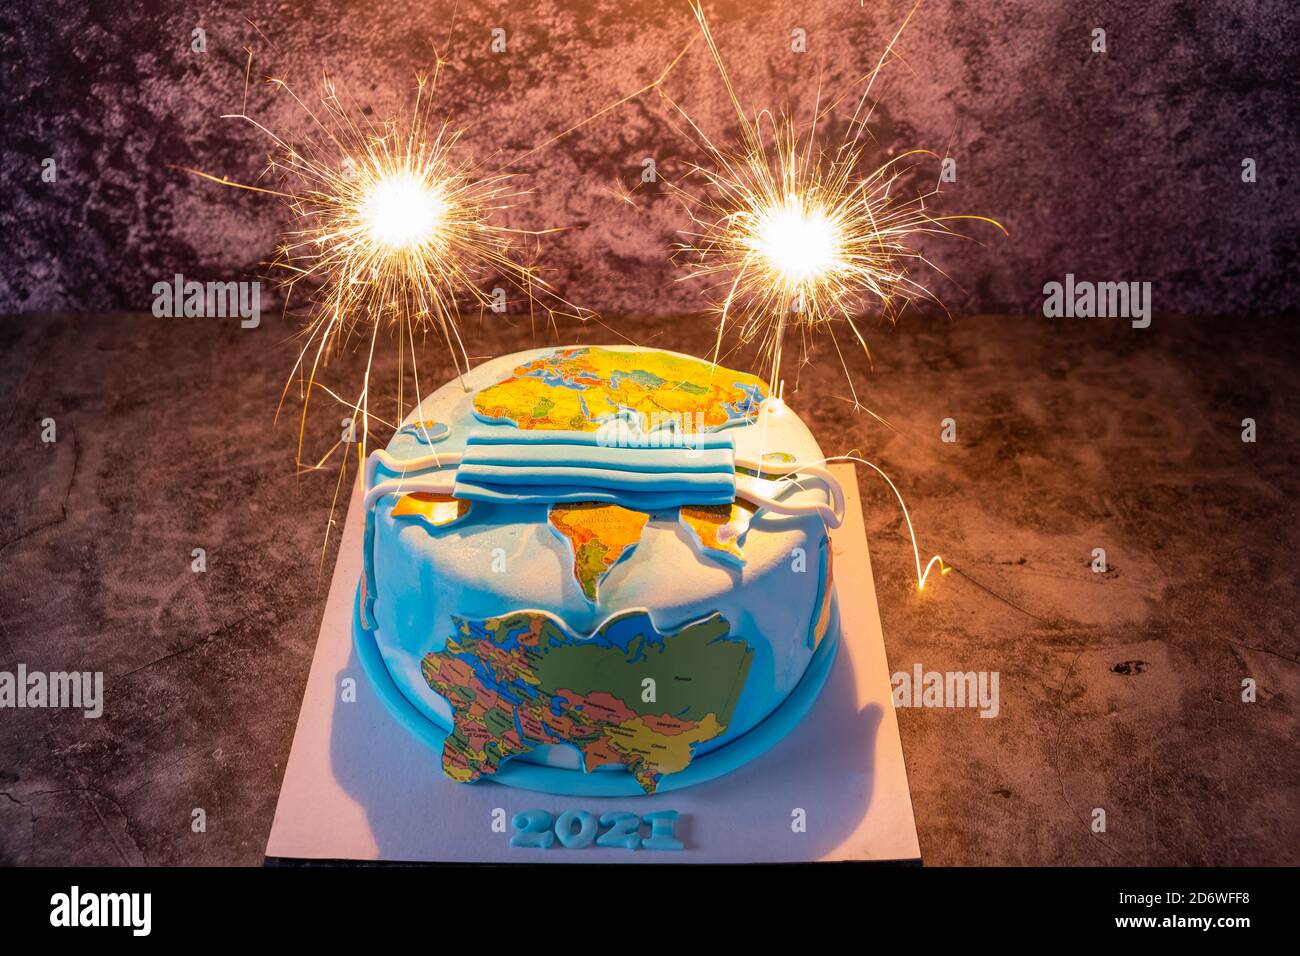 Birthday cake with sparkler on black background. Close-up view. New Year's cake with Corona virus concept. Stock Photo